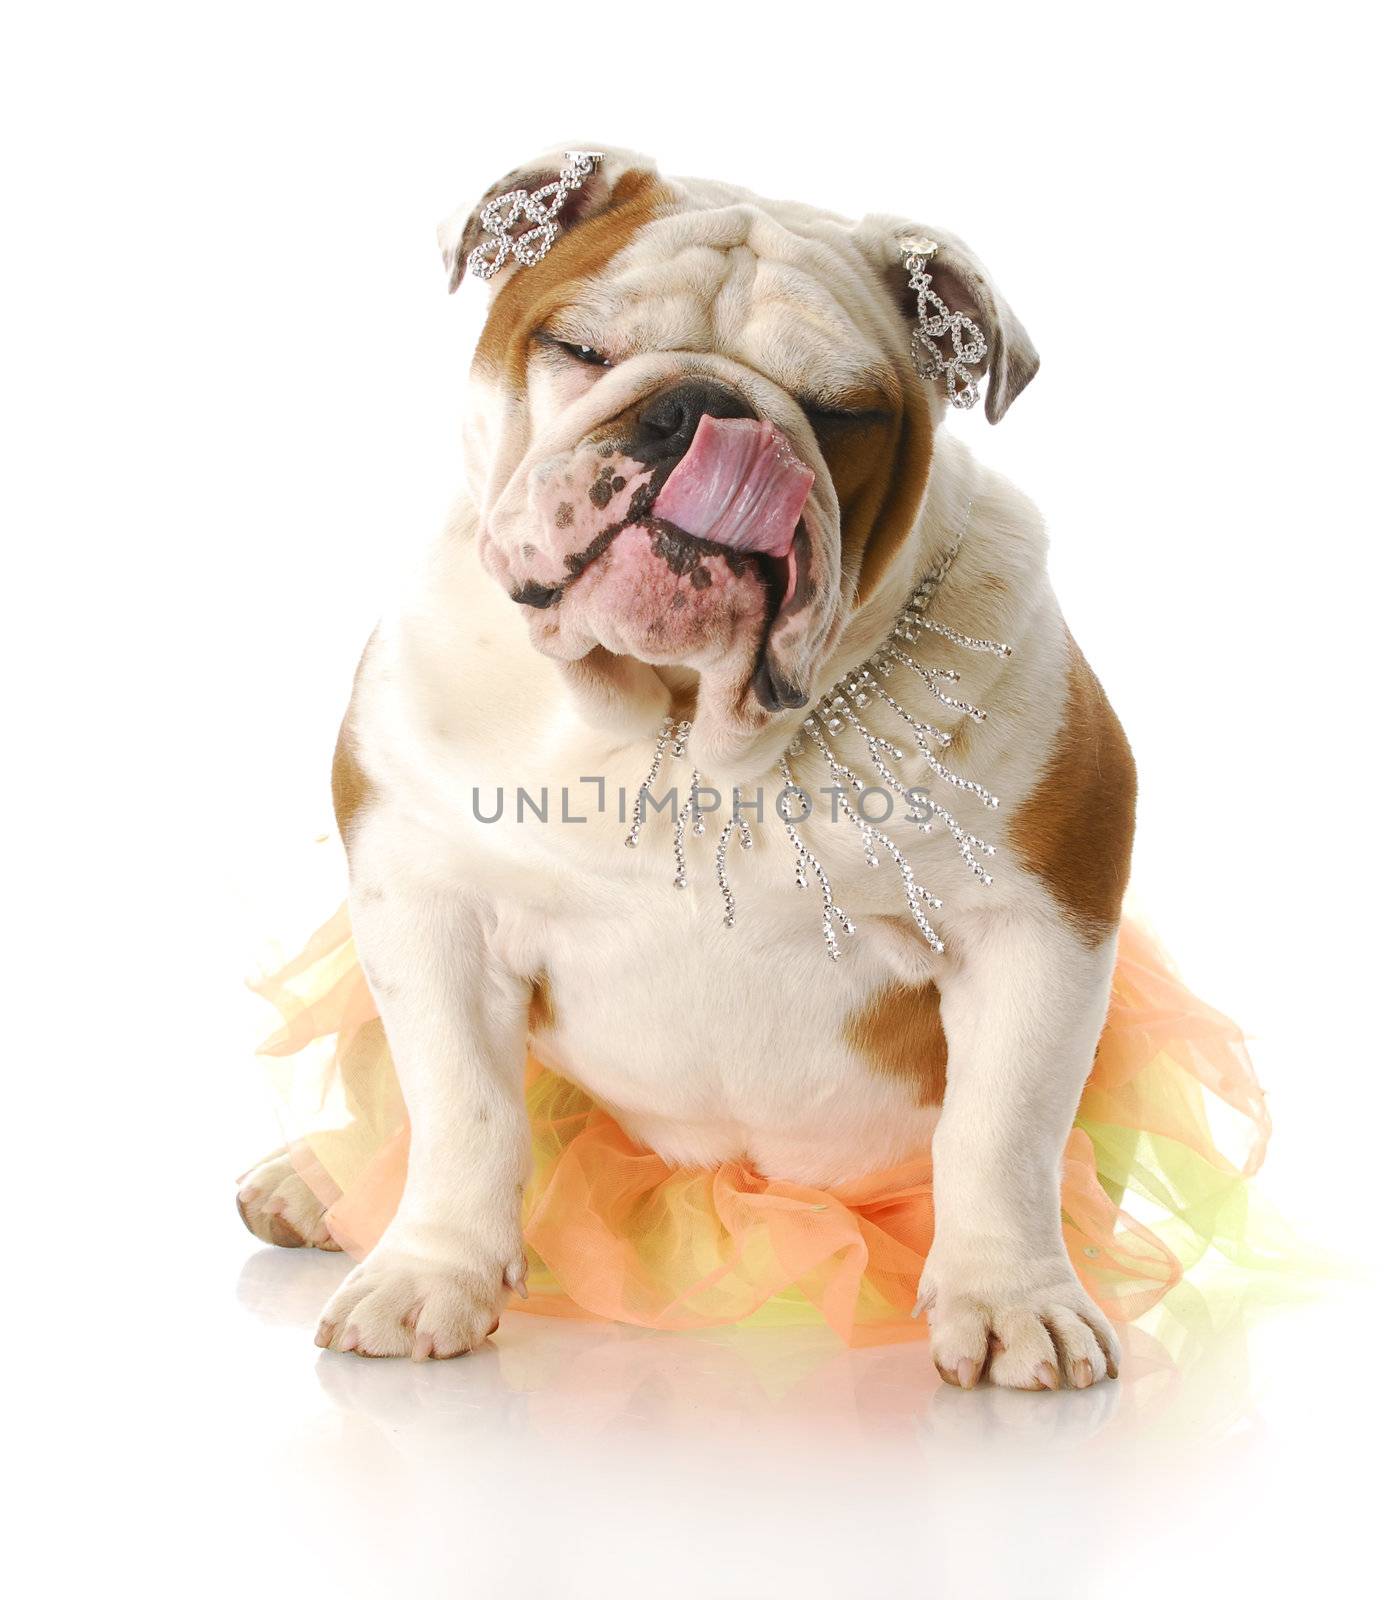 adorable english bulldog wearing girl costume licking lips with reflection on white background